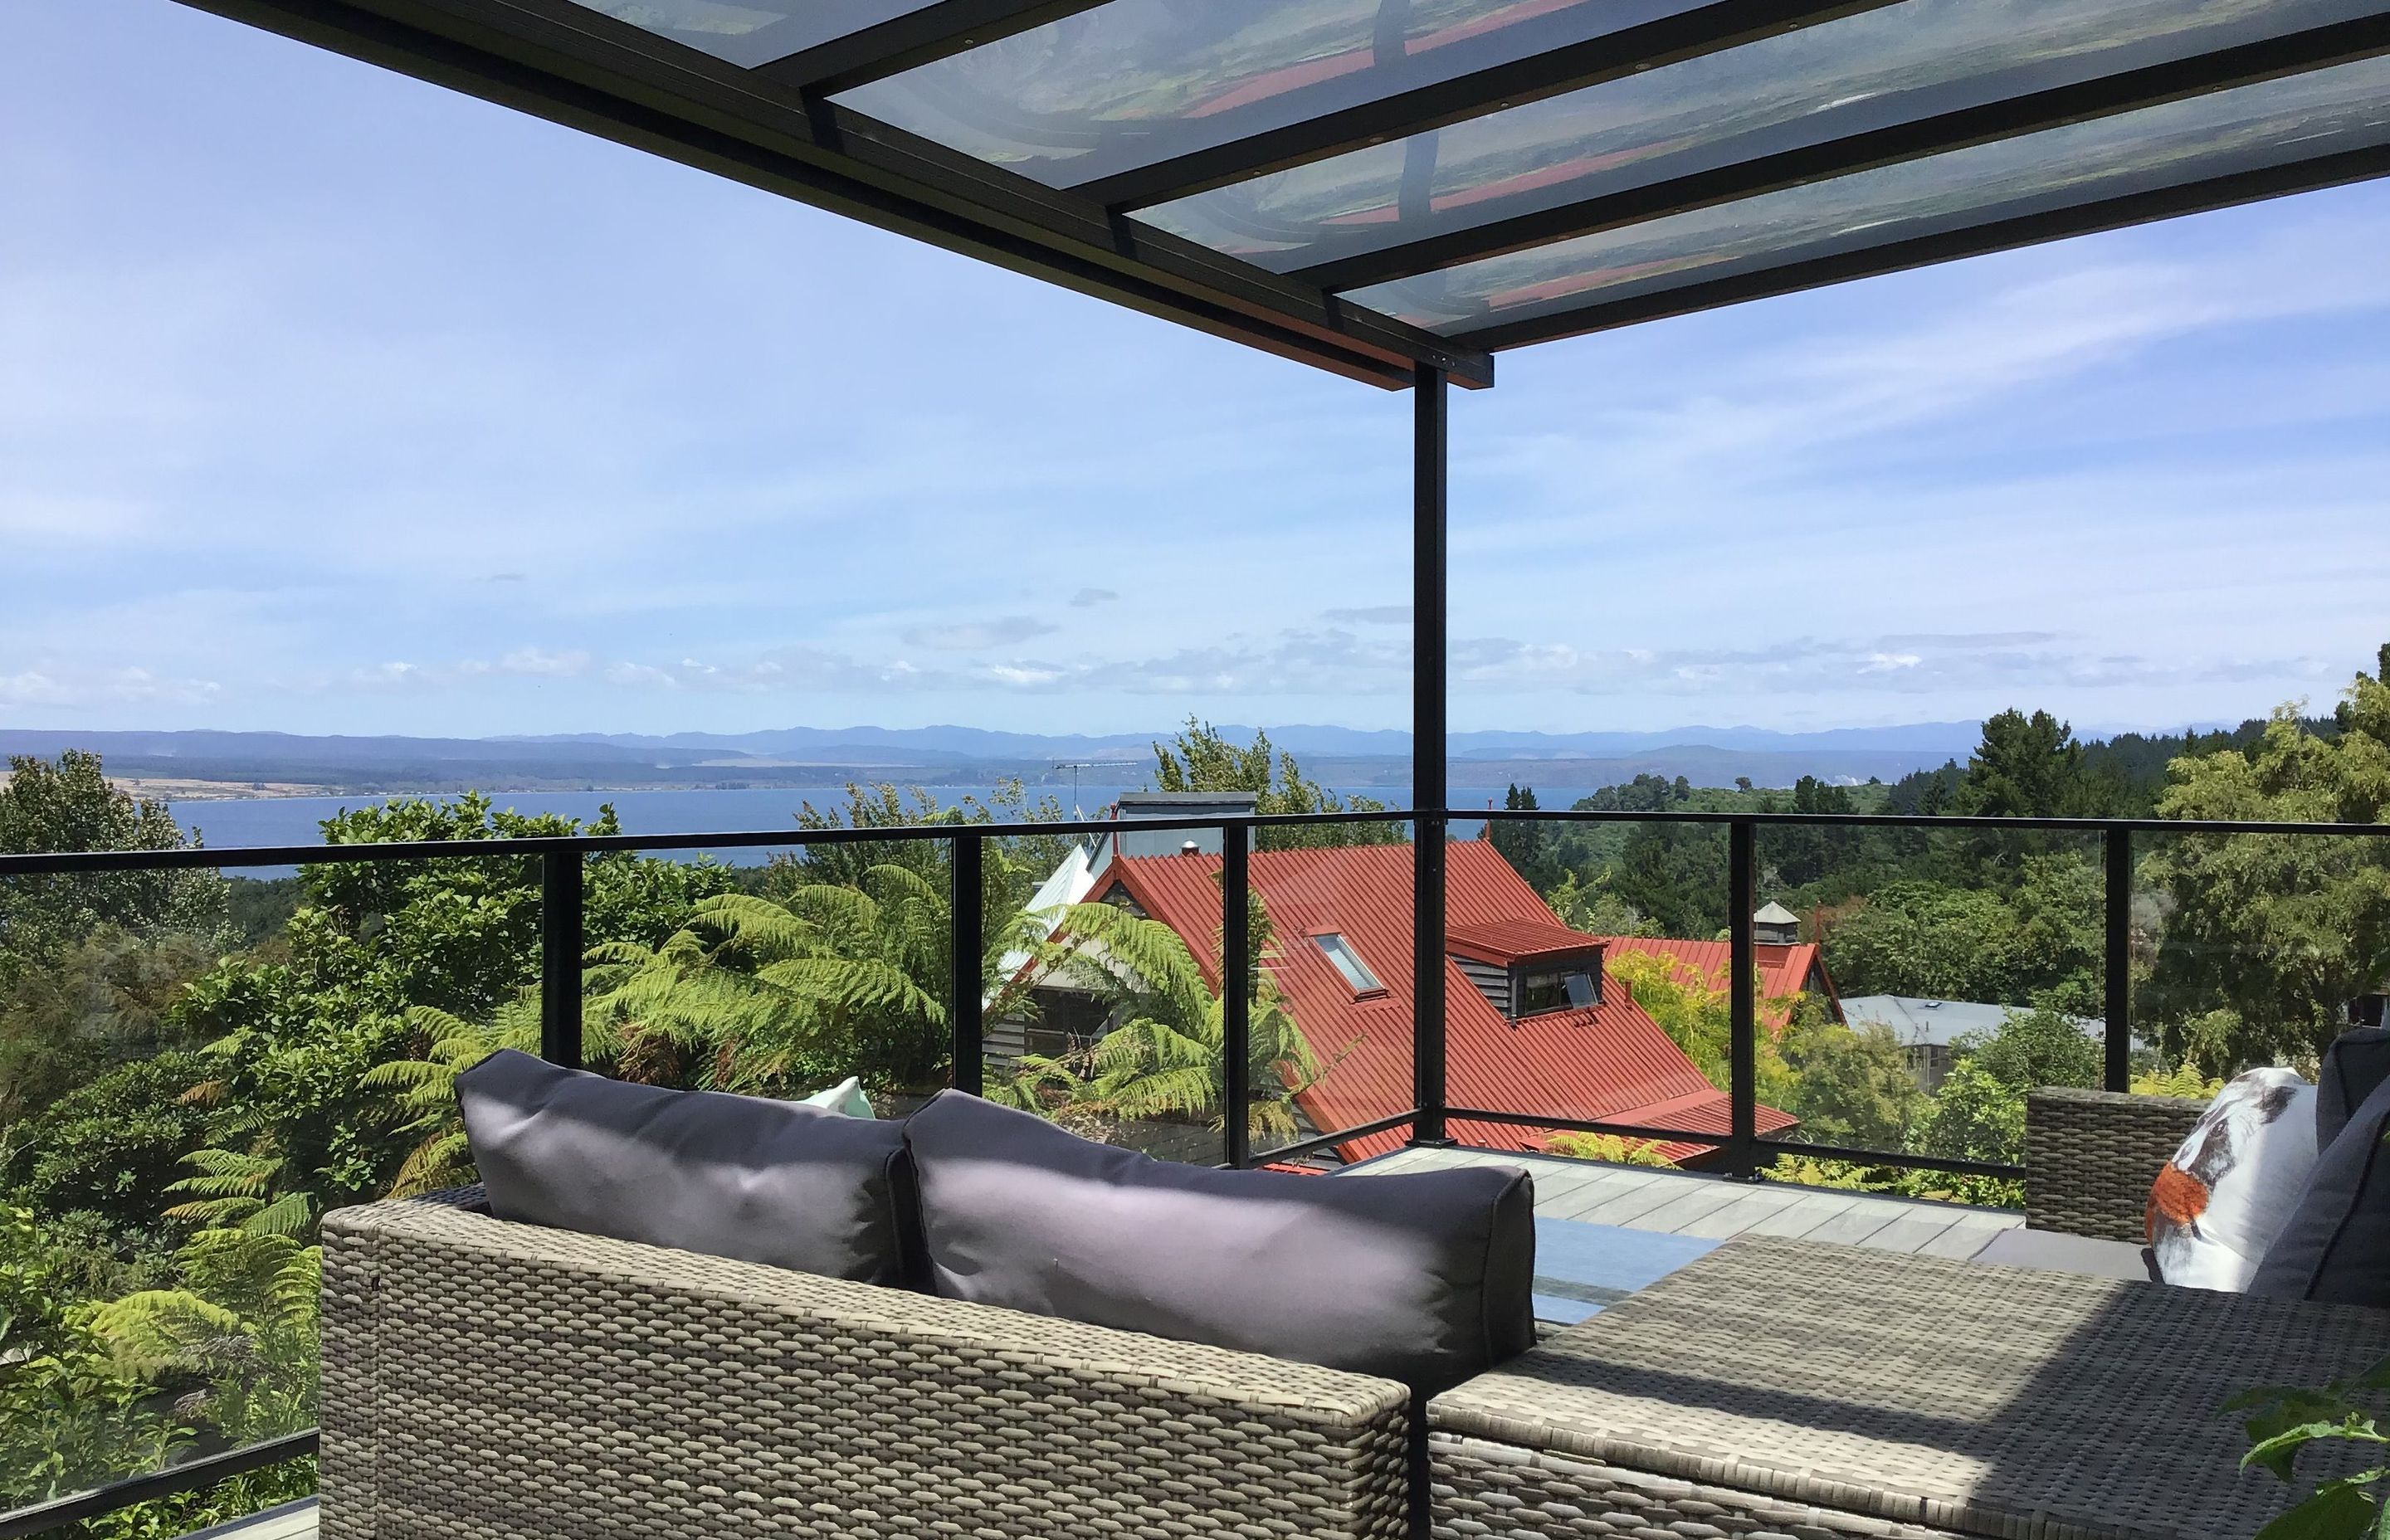 Covered deck off living room overlooking Lake Taupo